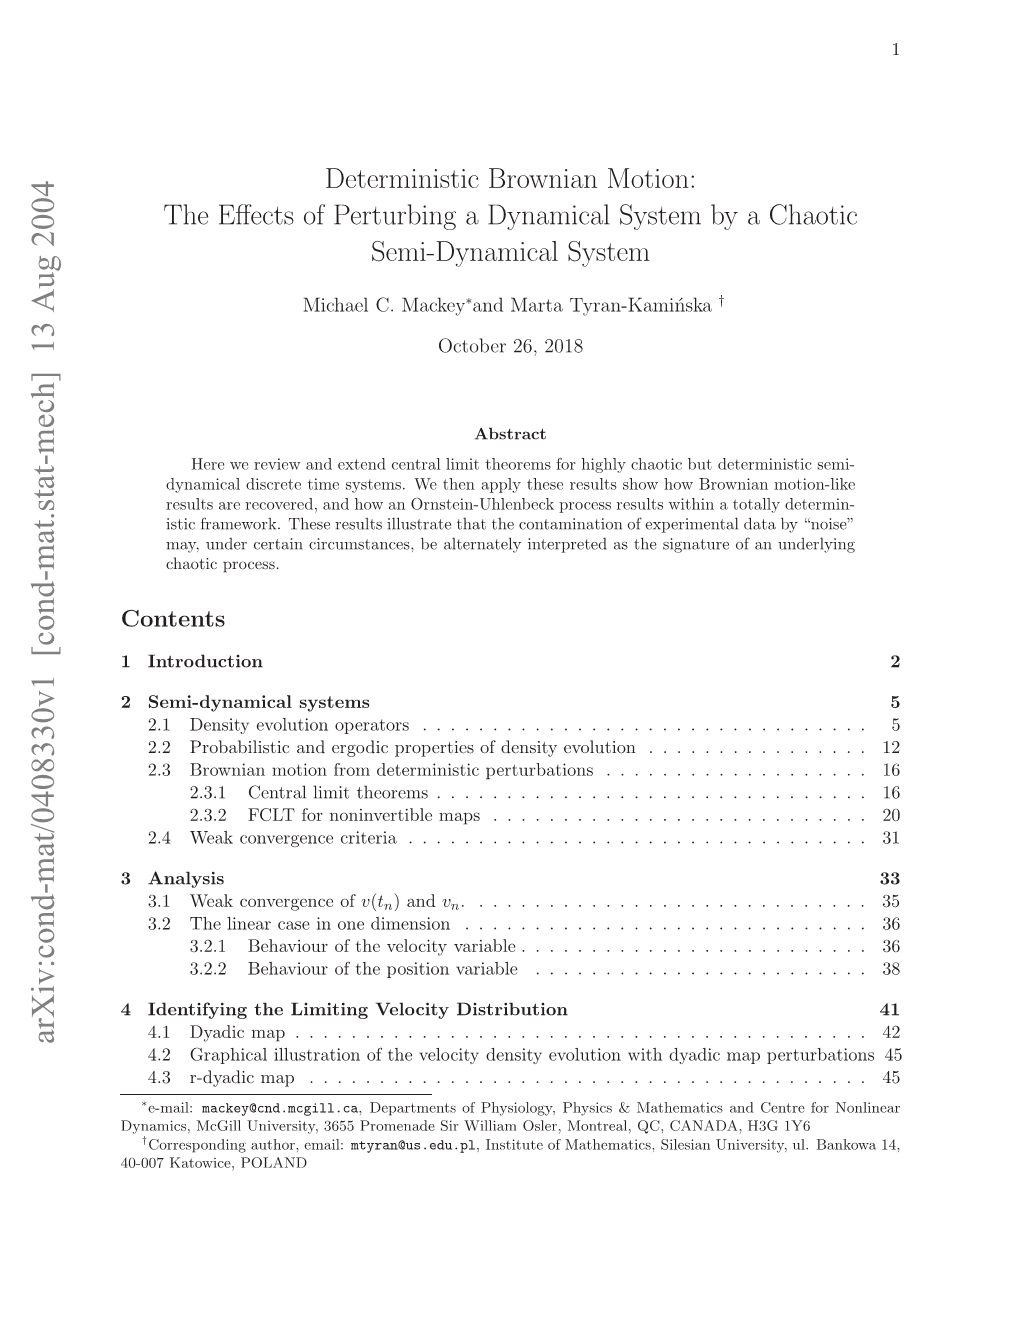 Deterministic Brownian Motion: the Effects of Perturbing a Dynamical